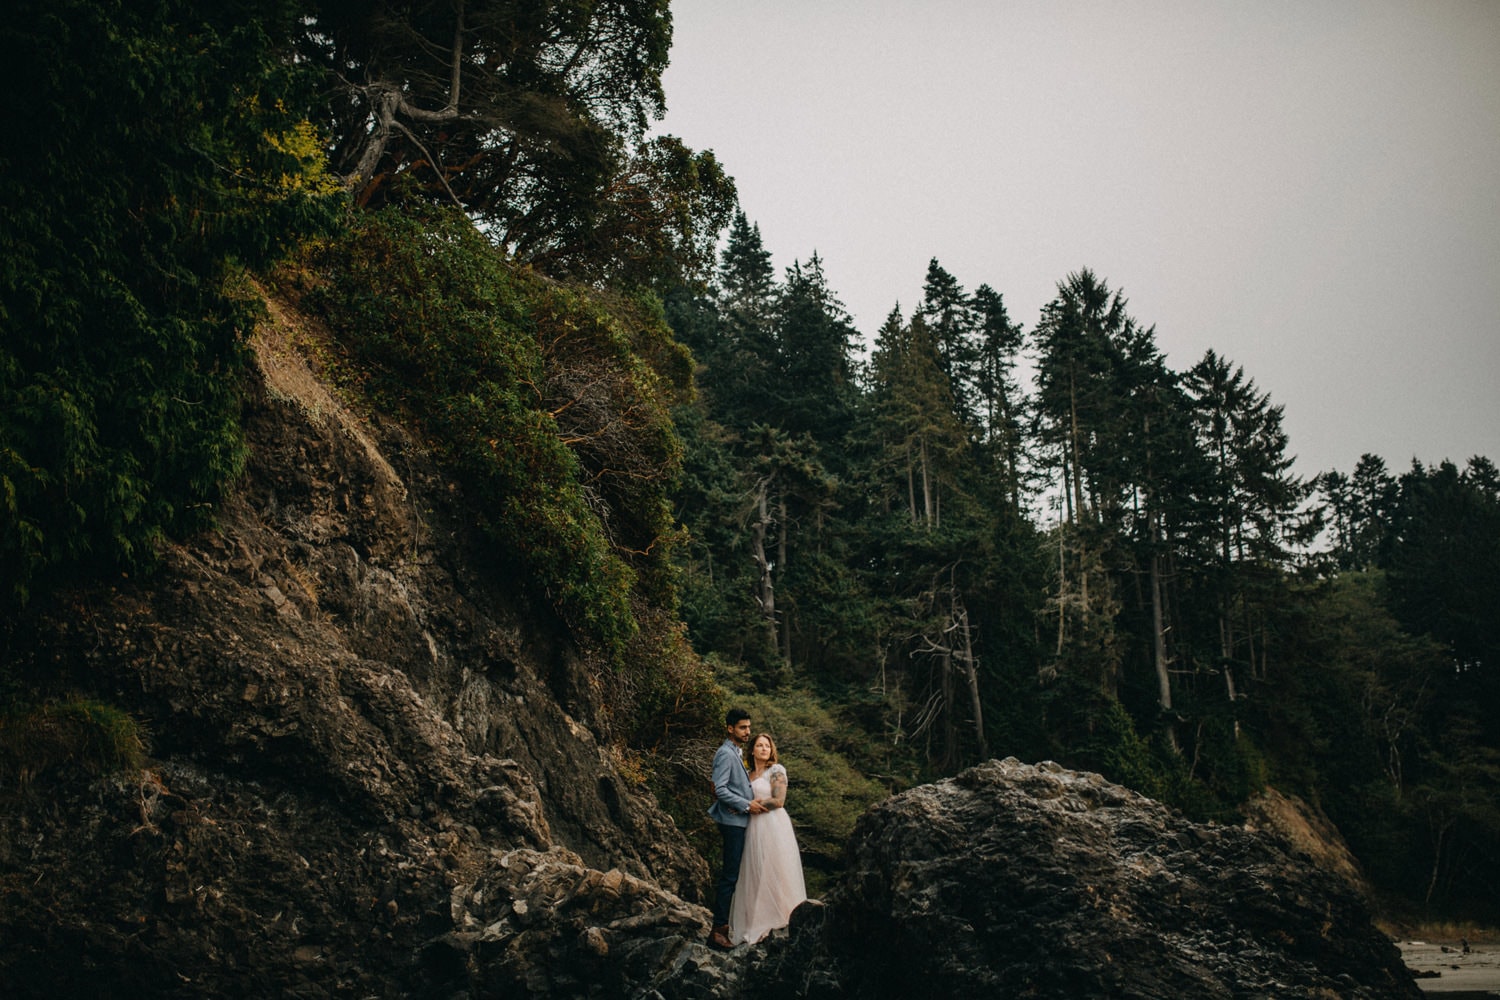 epic landscape photo of newlywed couple bride in pink wedding dress with forest in background olympic peninsula elopement by marcela pulido portland oregon wedding and elopement photographer